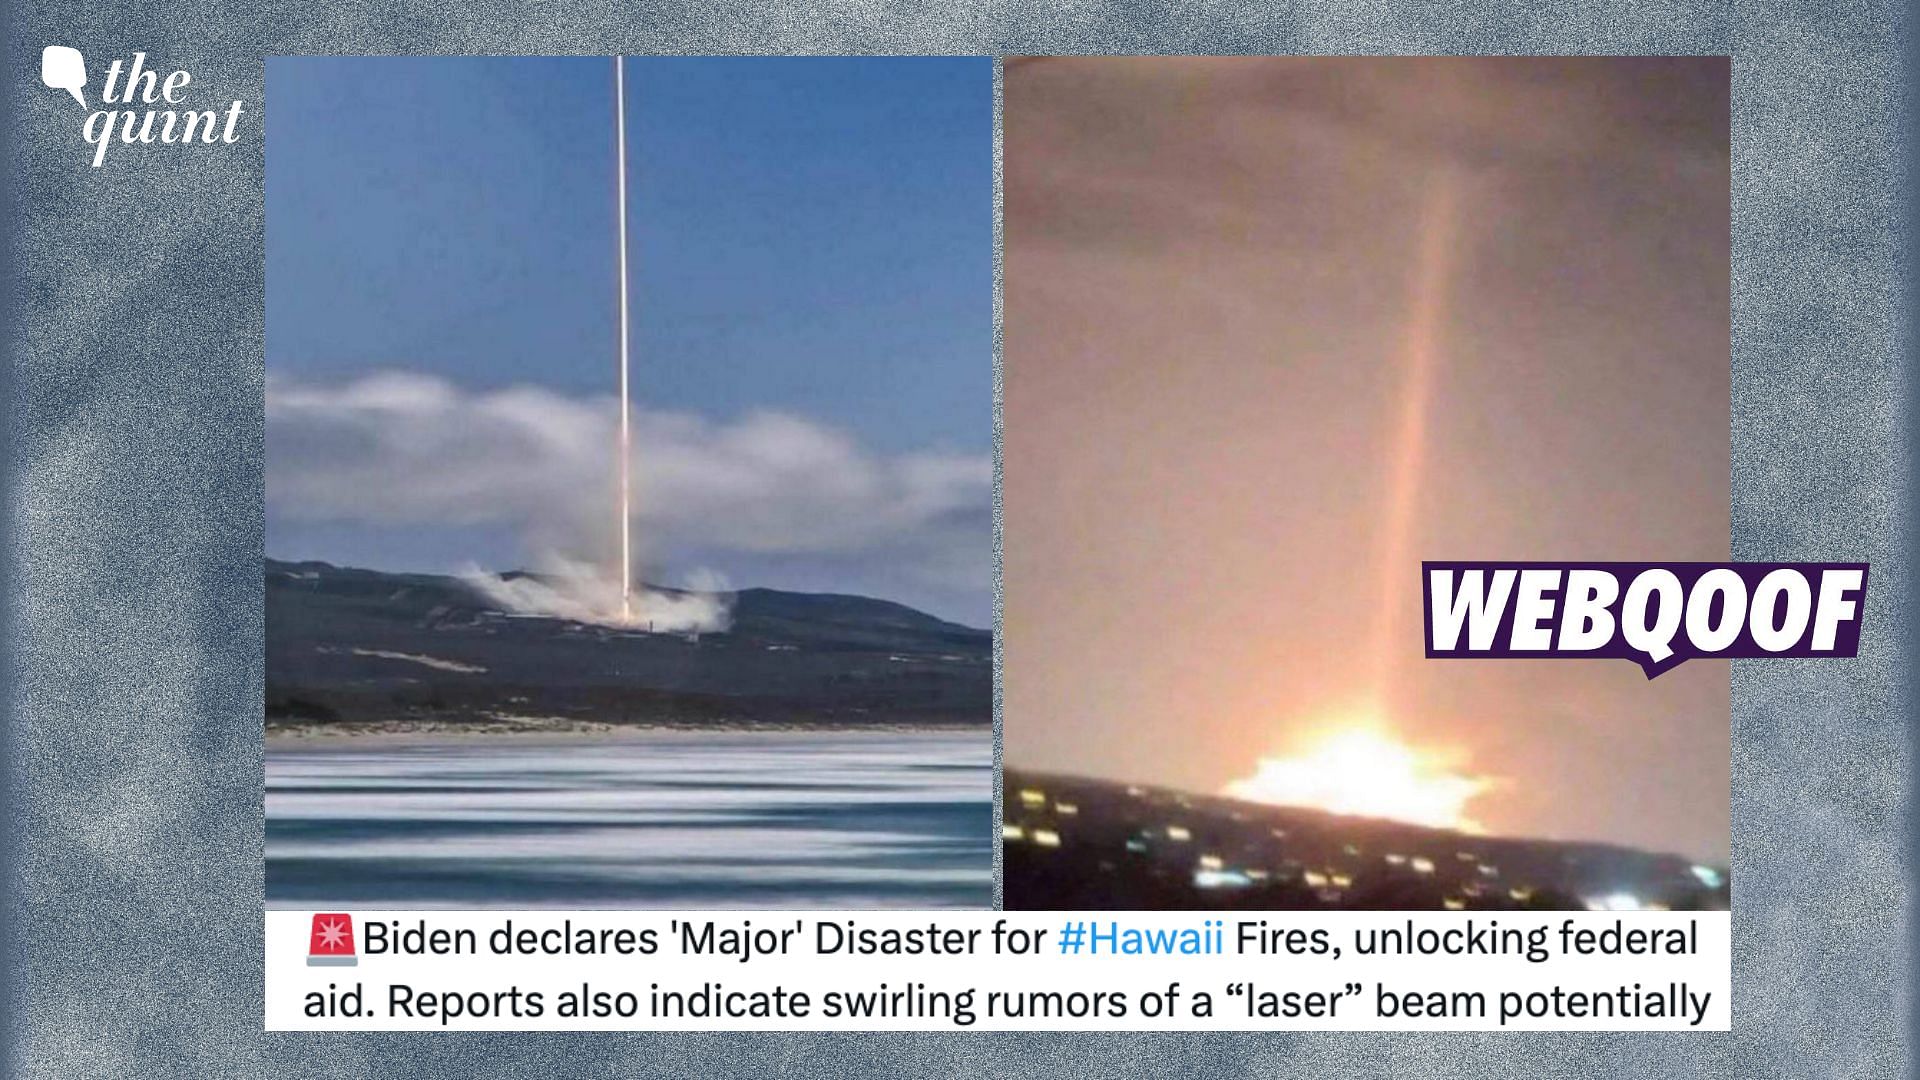 <div class="paragraphs"><p>Both these images are from 2018 and are unrelated to the wildfires in Hawaii.&nbsp;</p></div>